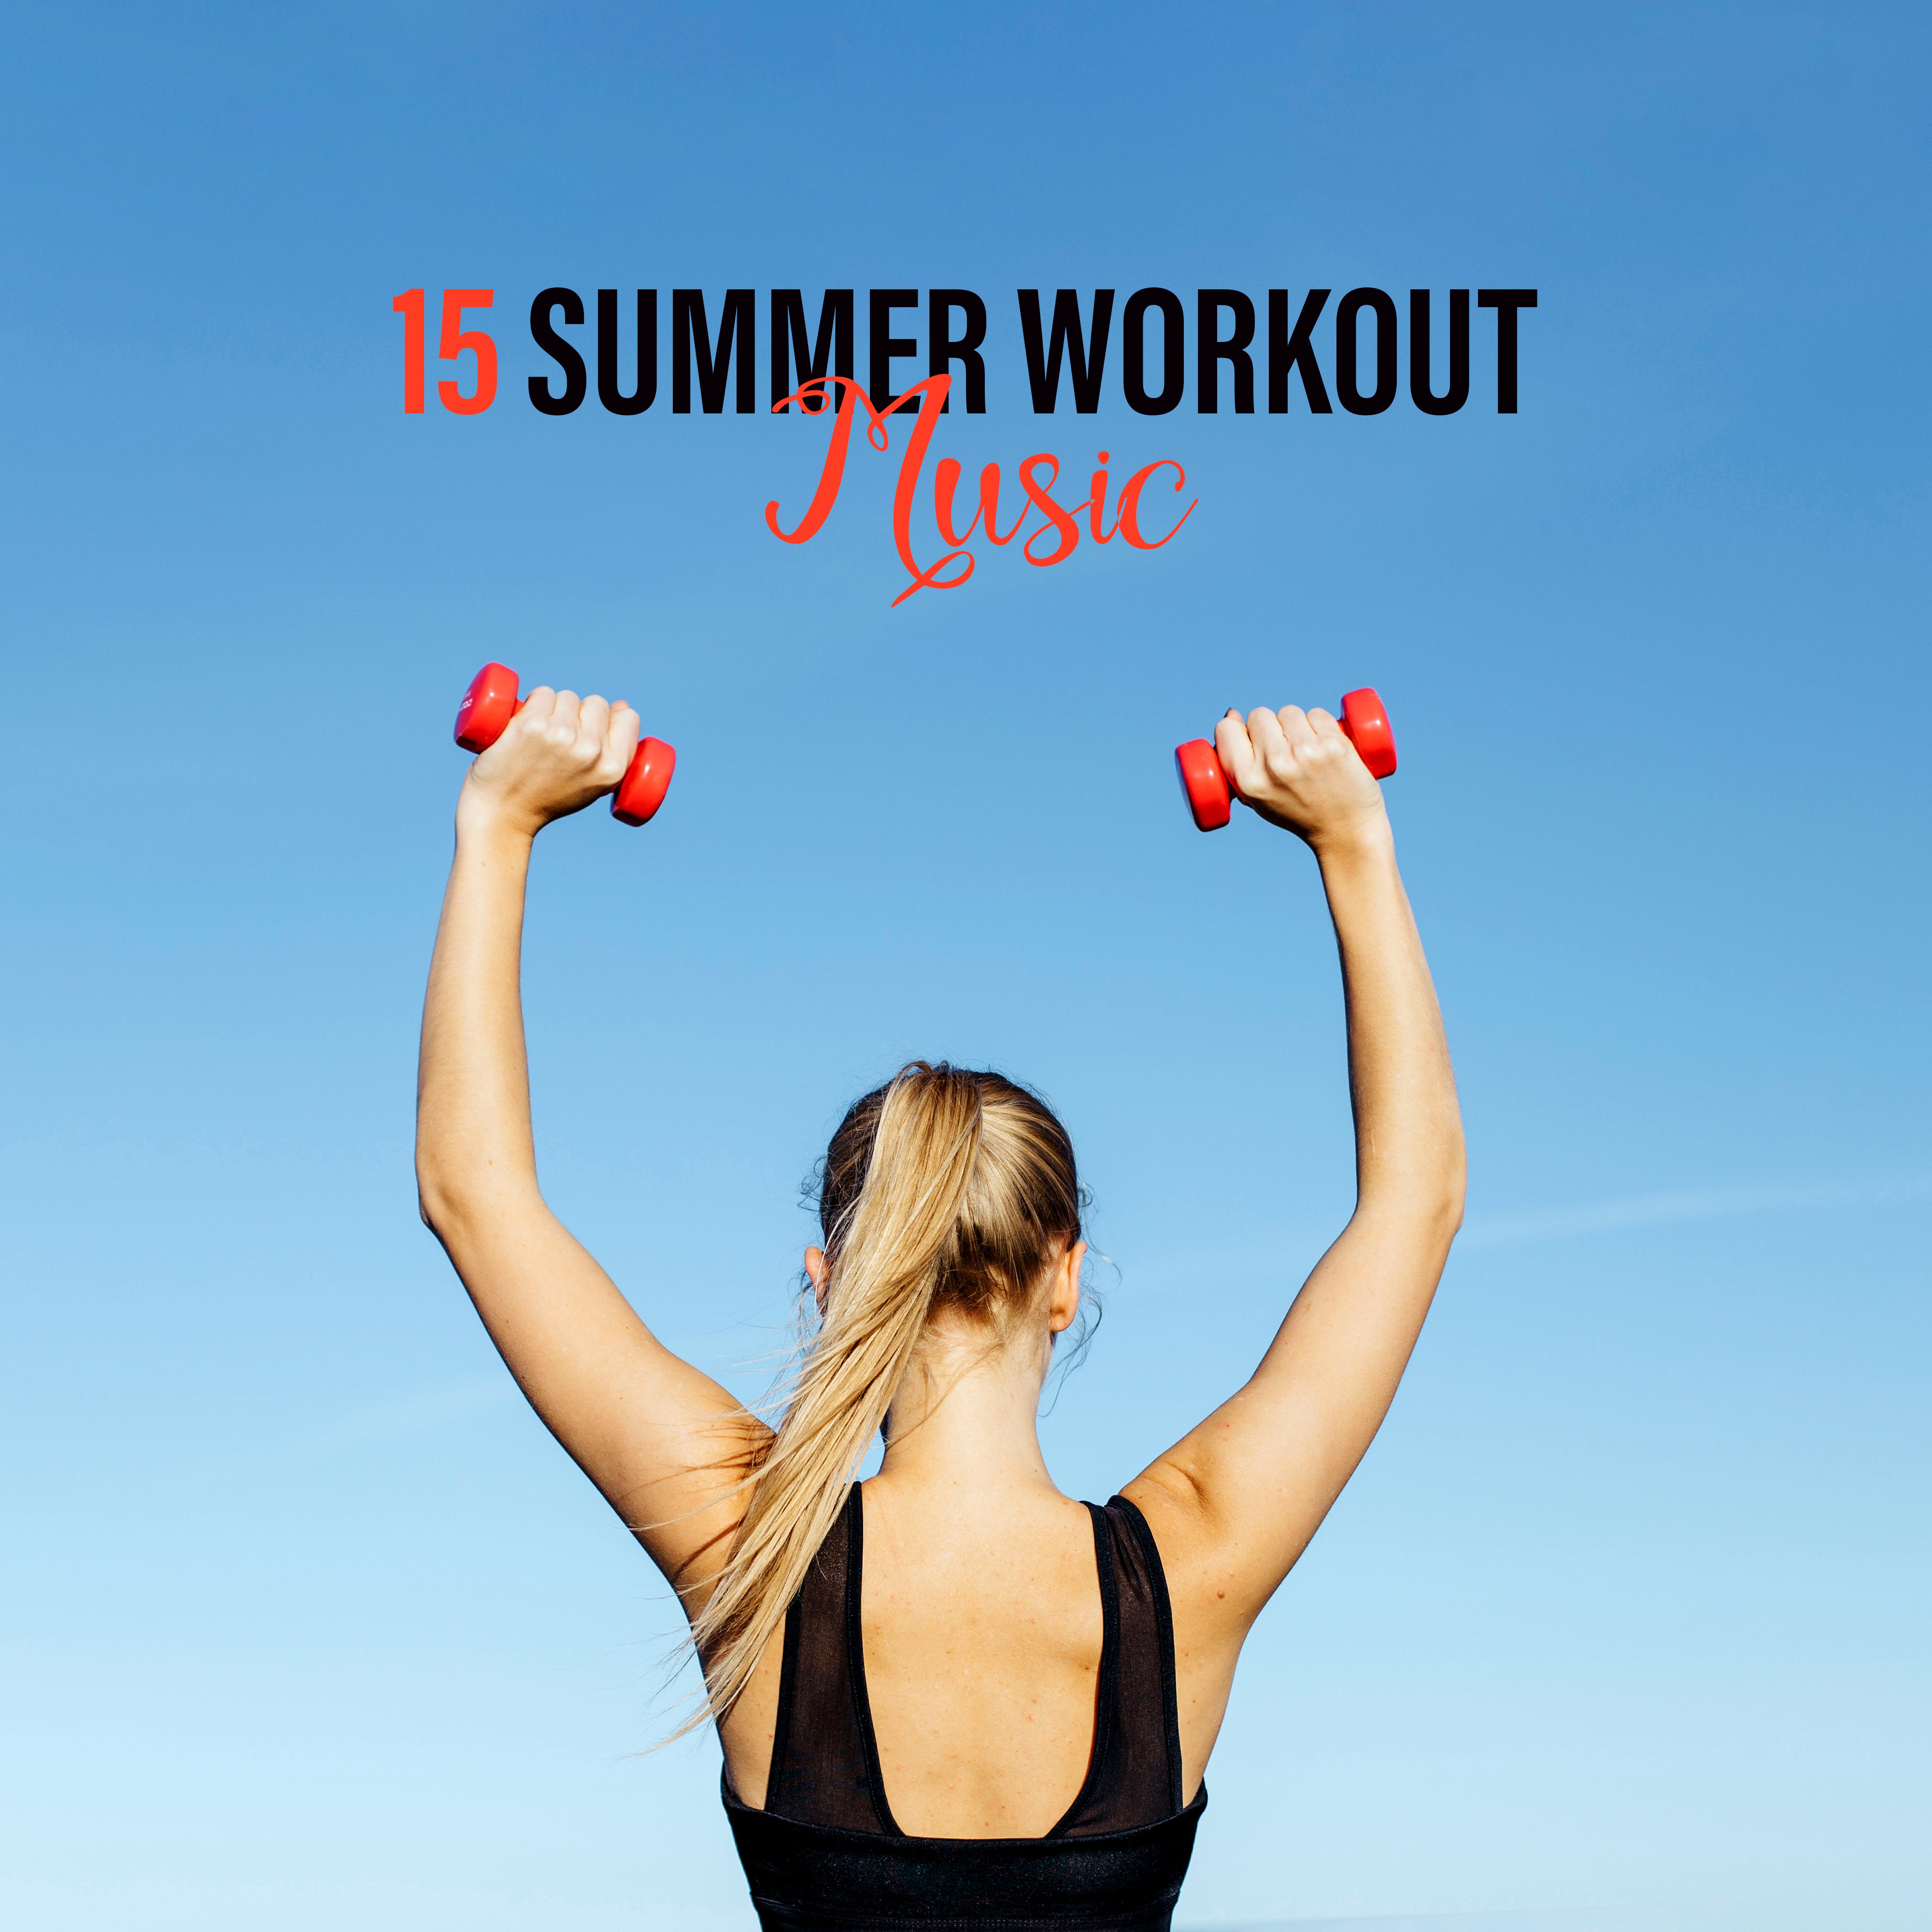 15 Summer Workout Music: Chill Out 2019, Lounge, Workout Tunes, Deep Relax